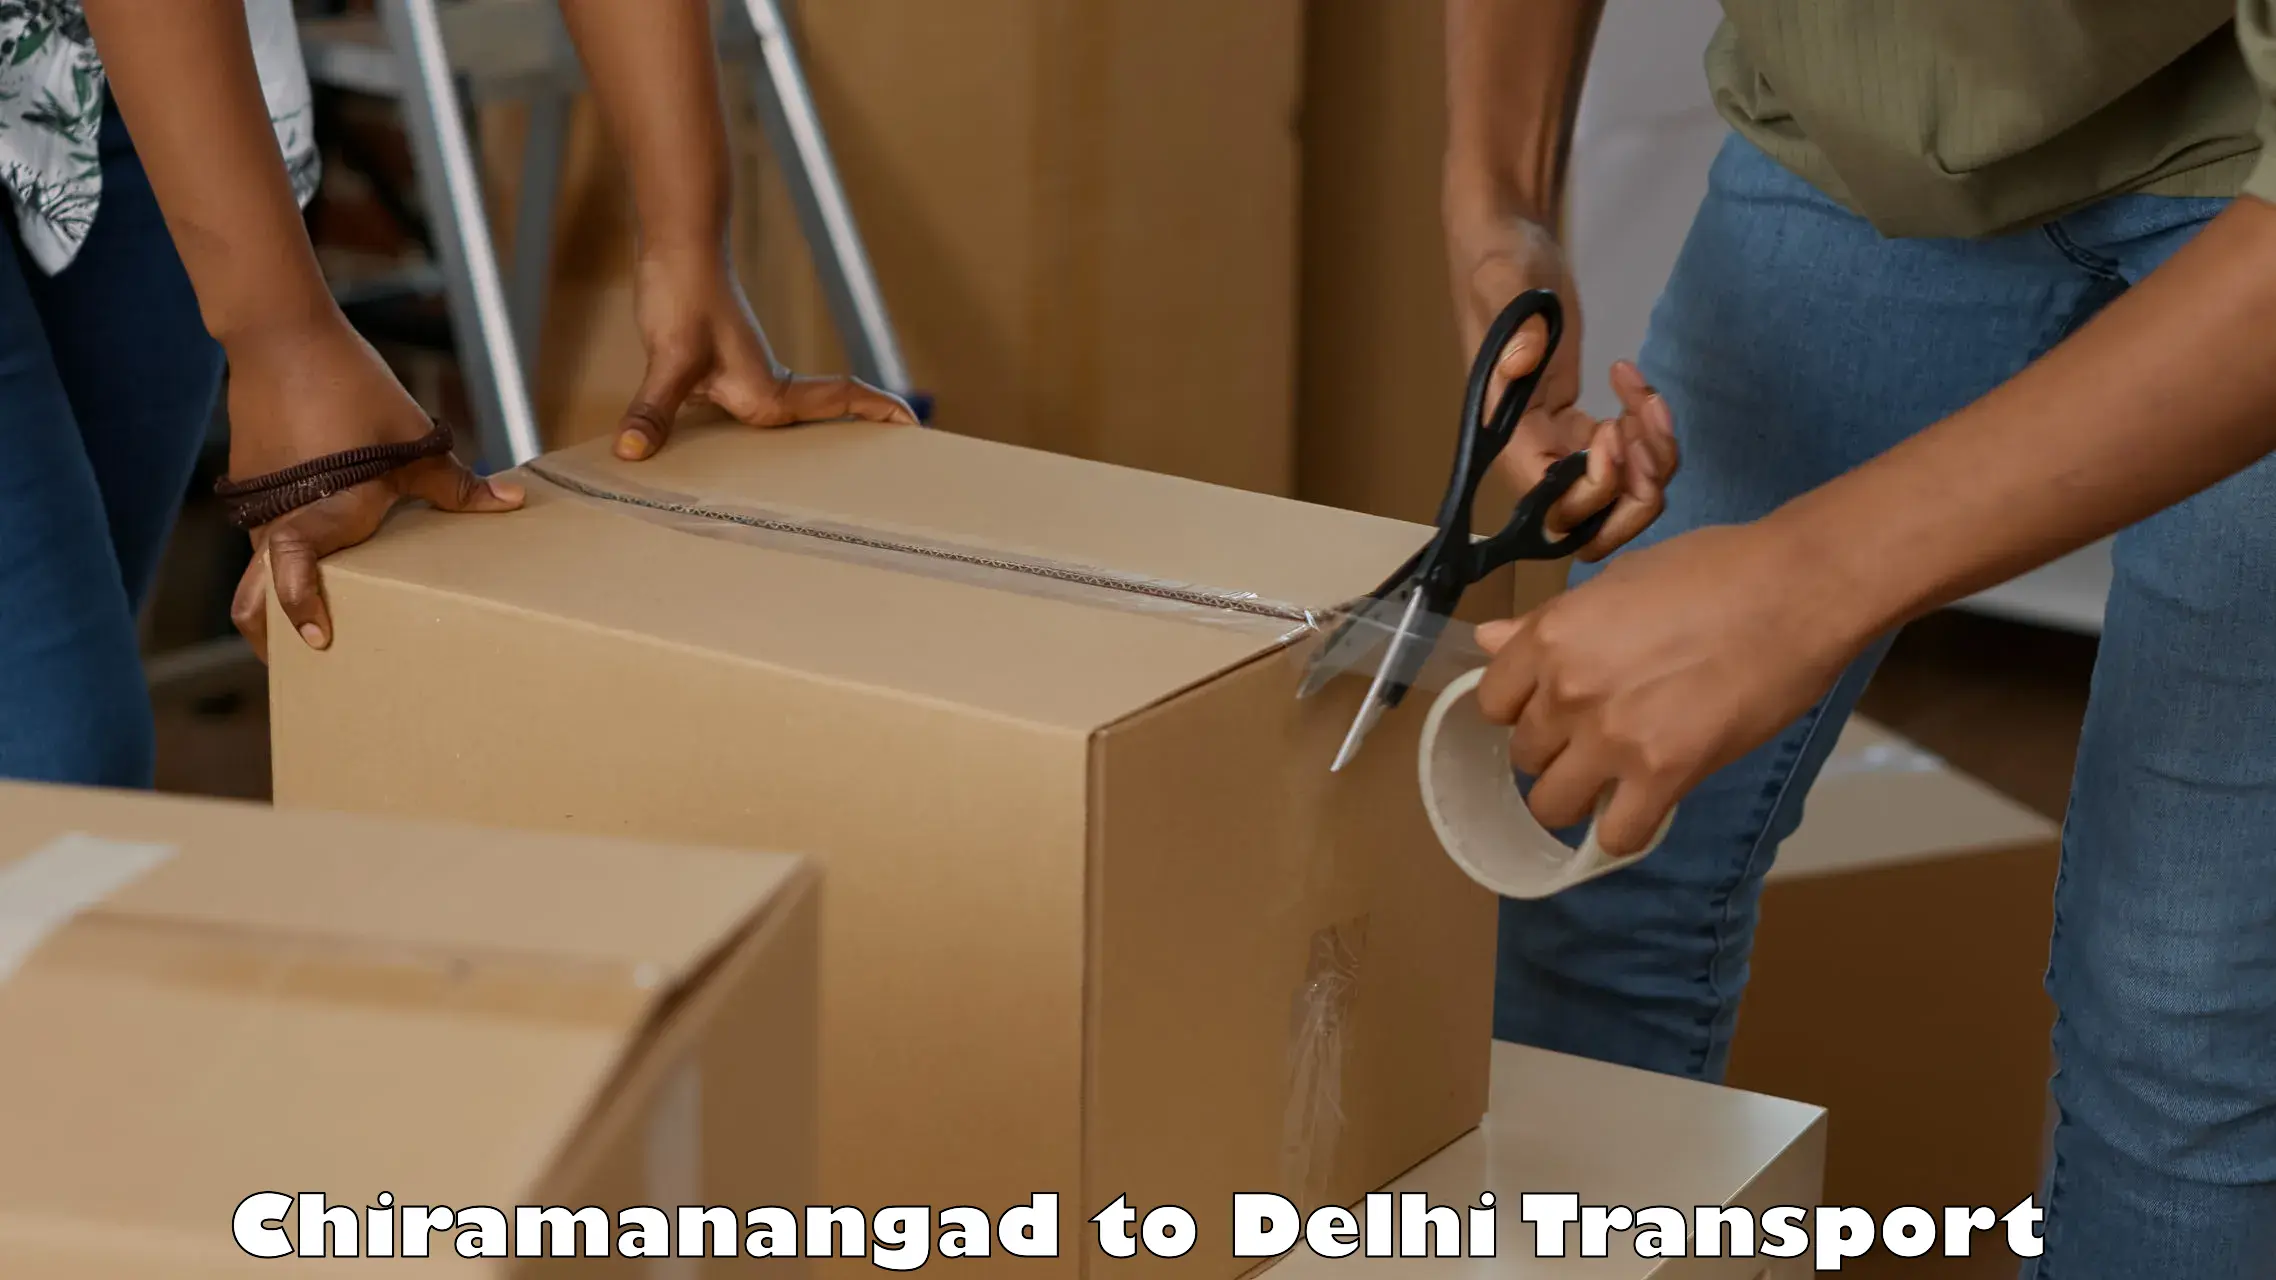 Goods delivery service Chiramanangad to NCR